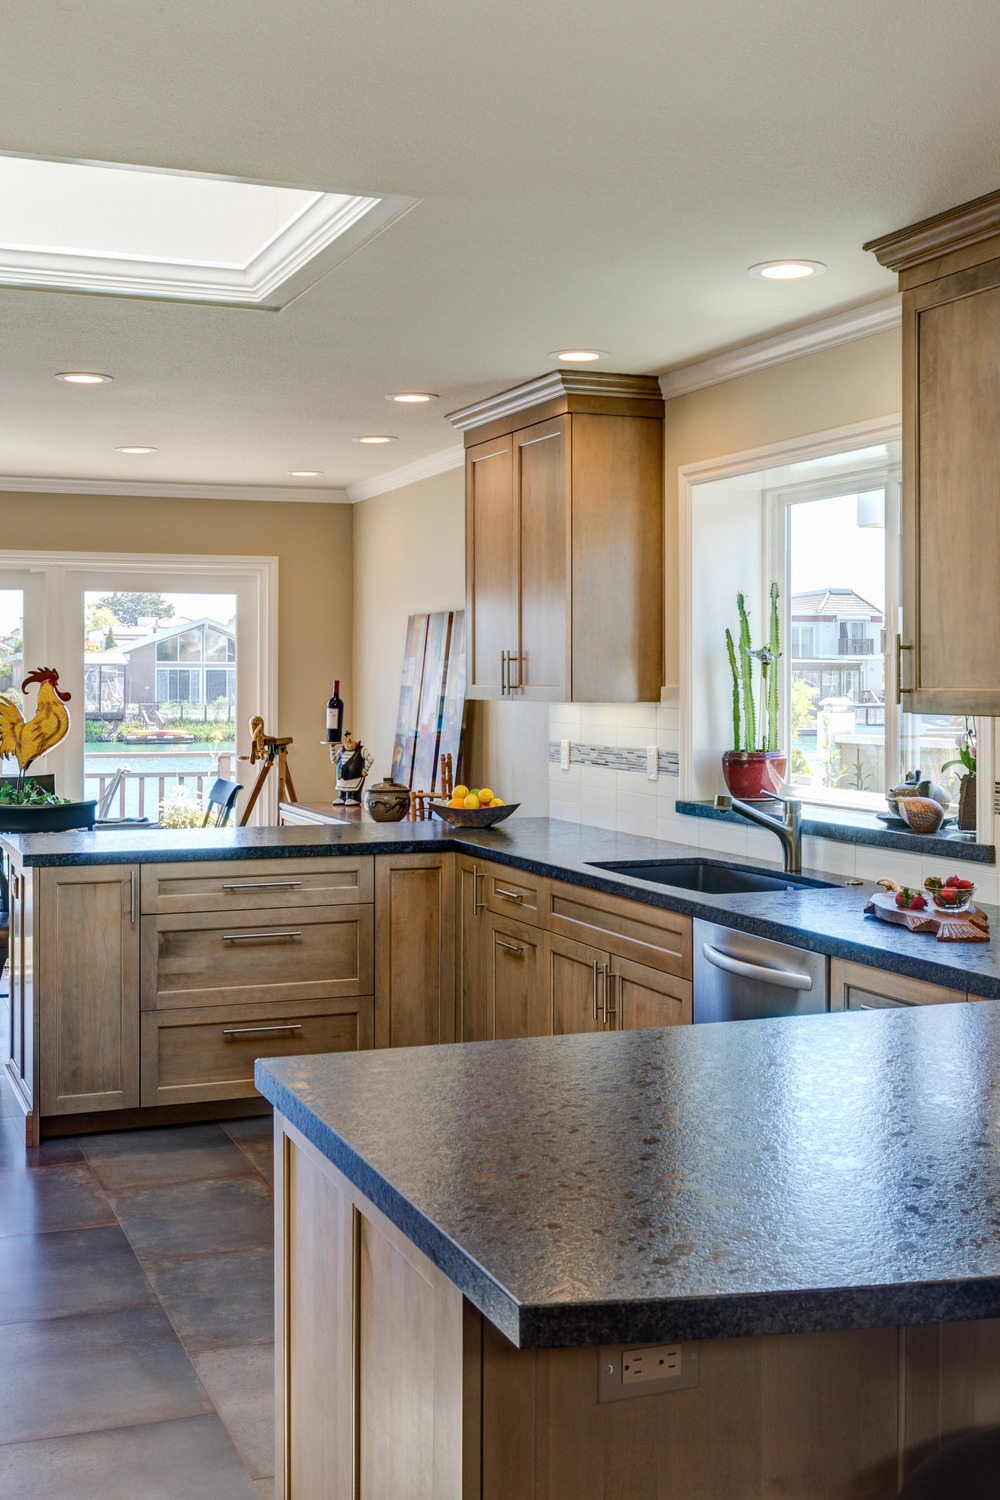 Cashew Color Stained Maple Cabinets Leather Finish Steel Gray Granite Countertops White Subway Backsplash Tiles